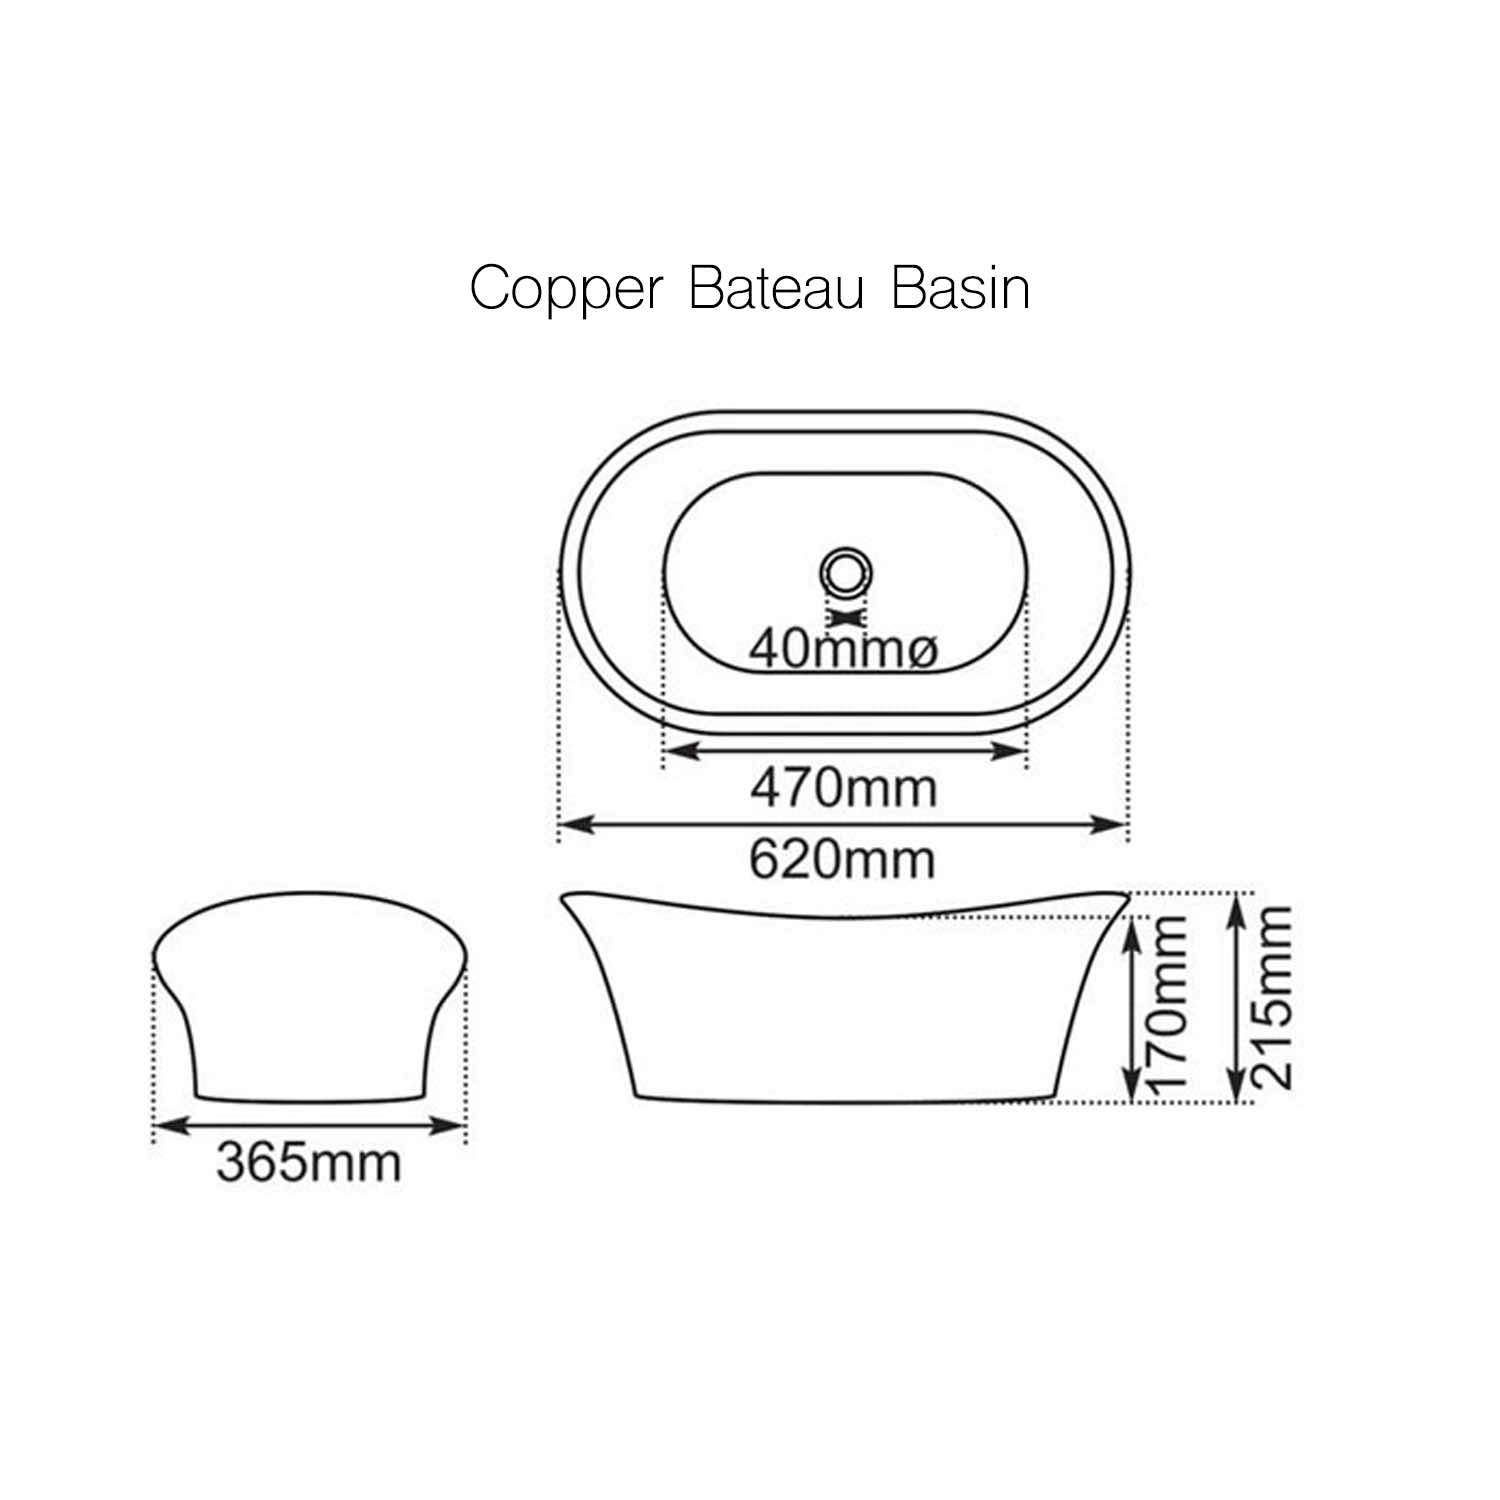 Copper basin technical drawing